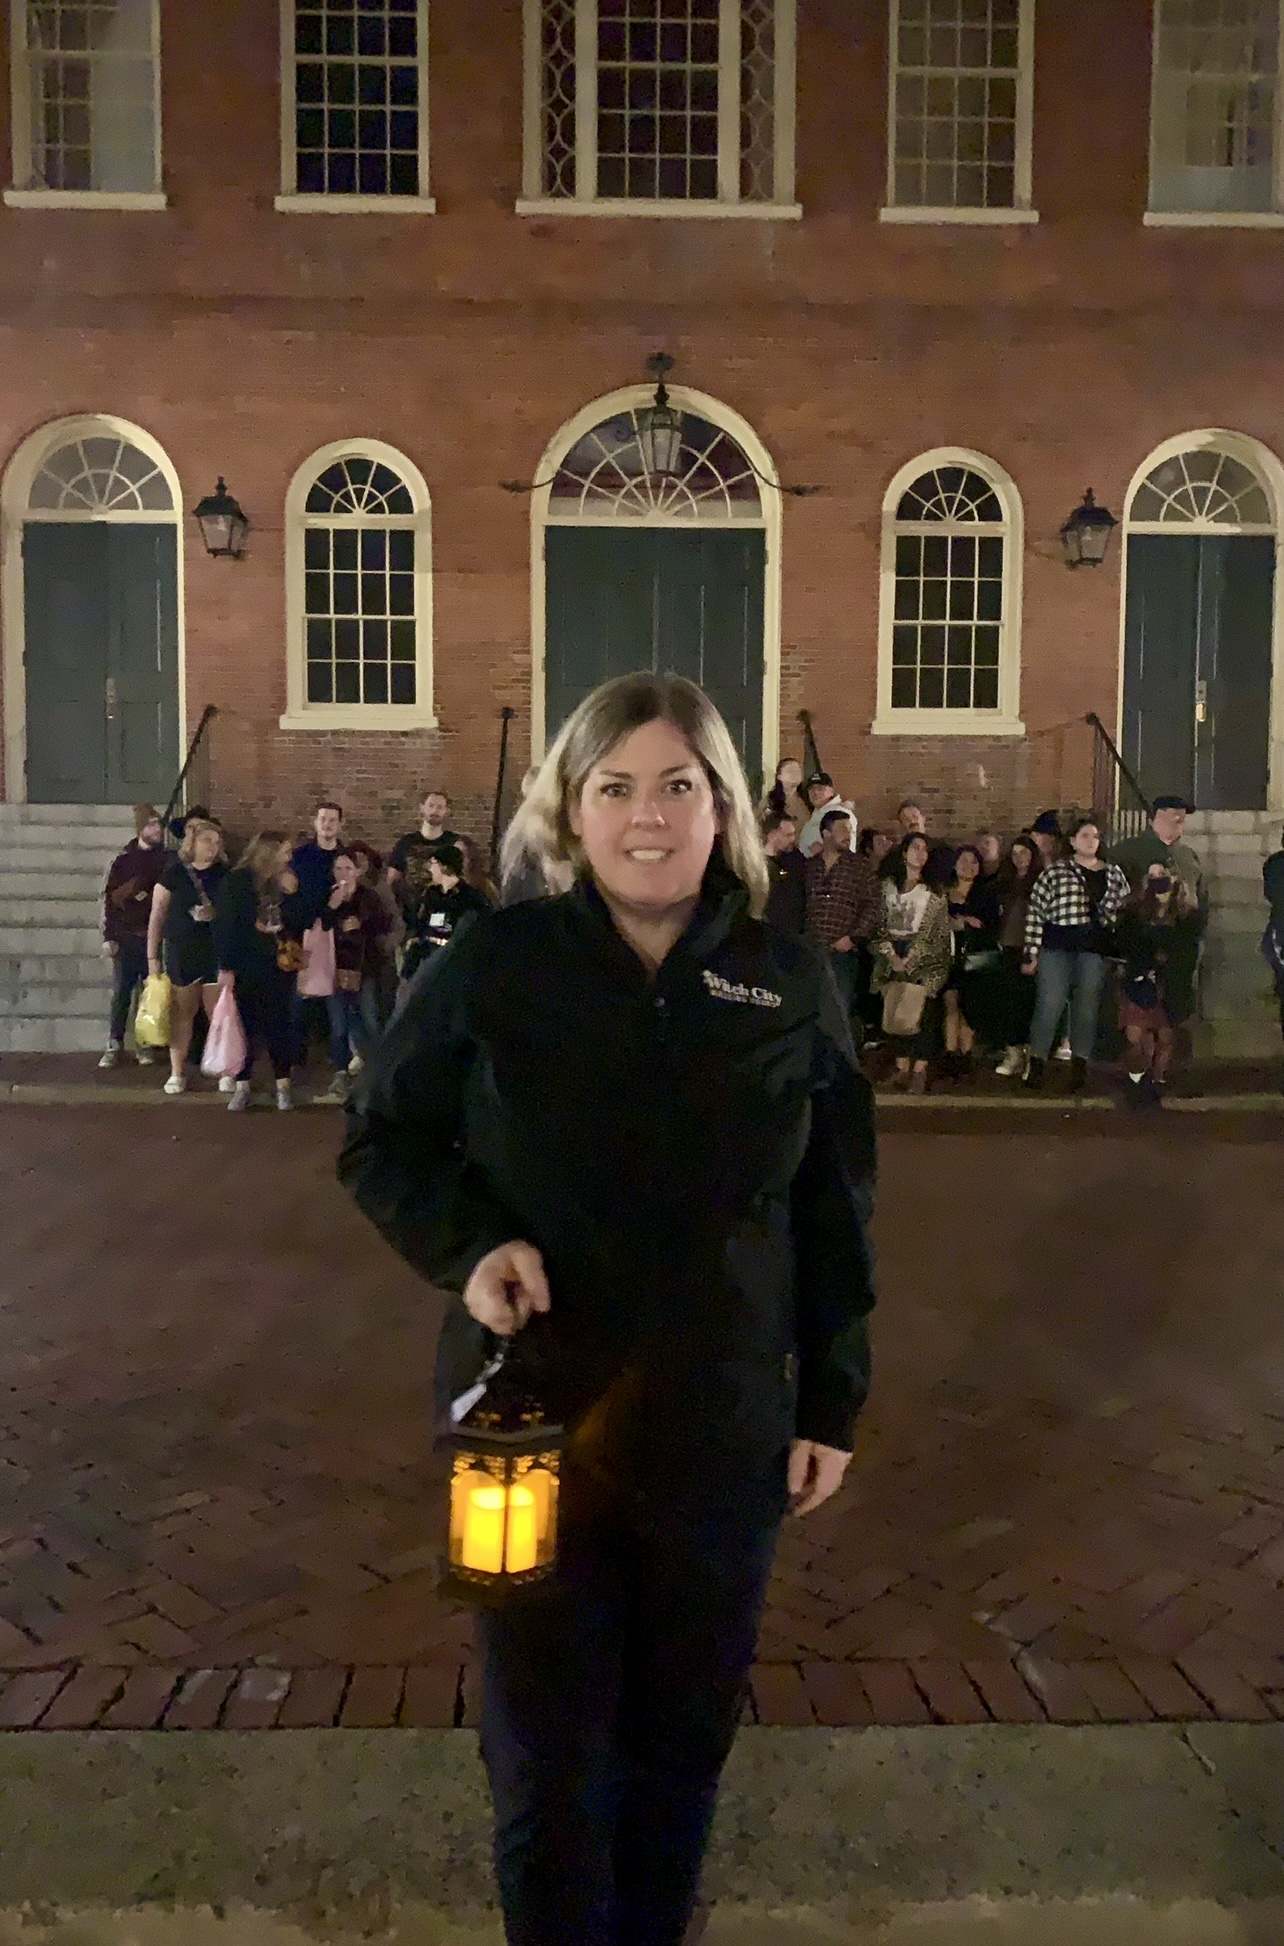 A lady clutching a lantern is positioned before a brick structure during the nighttime, with an assembly of individuals congregated in the shadows behind her.